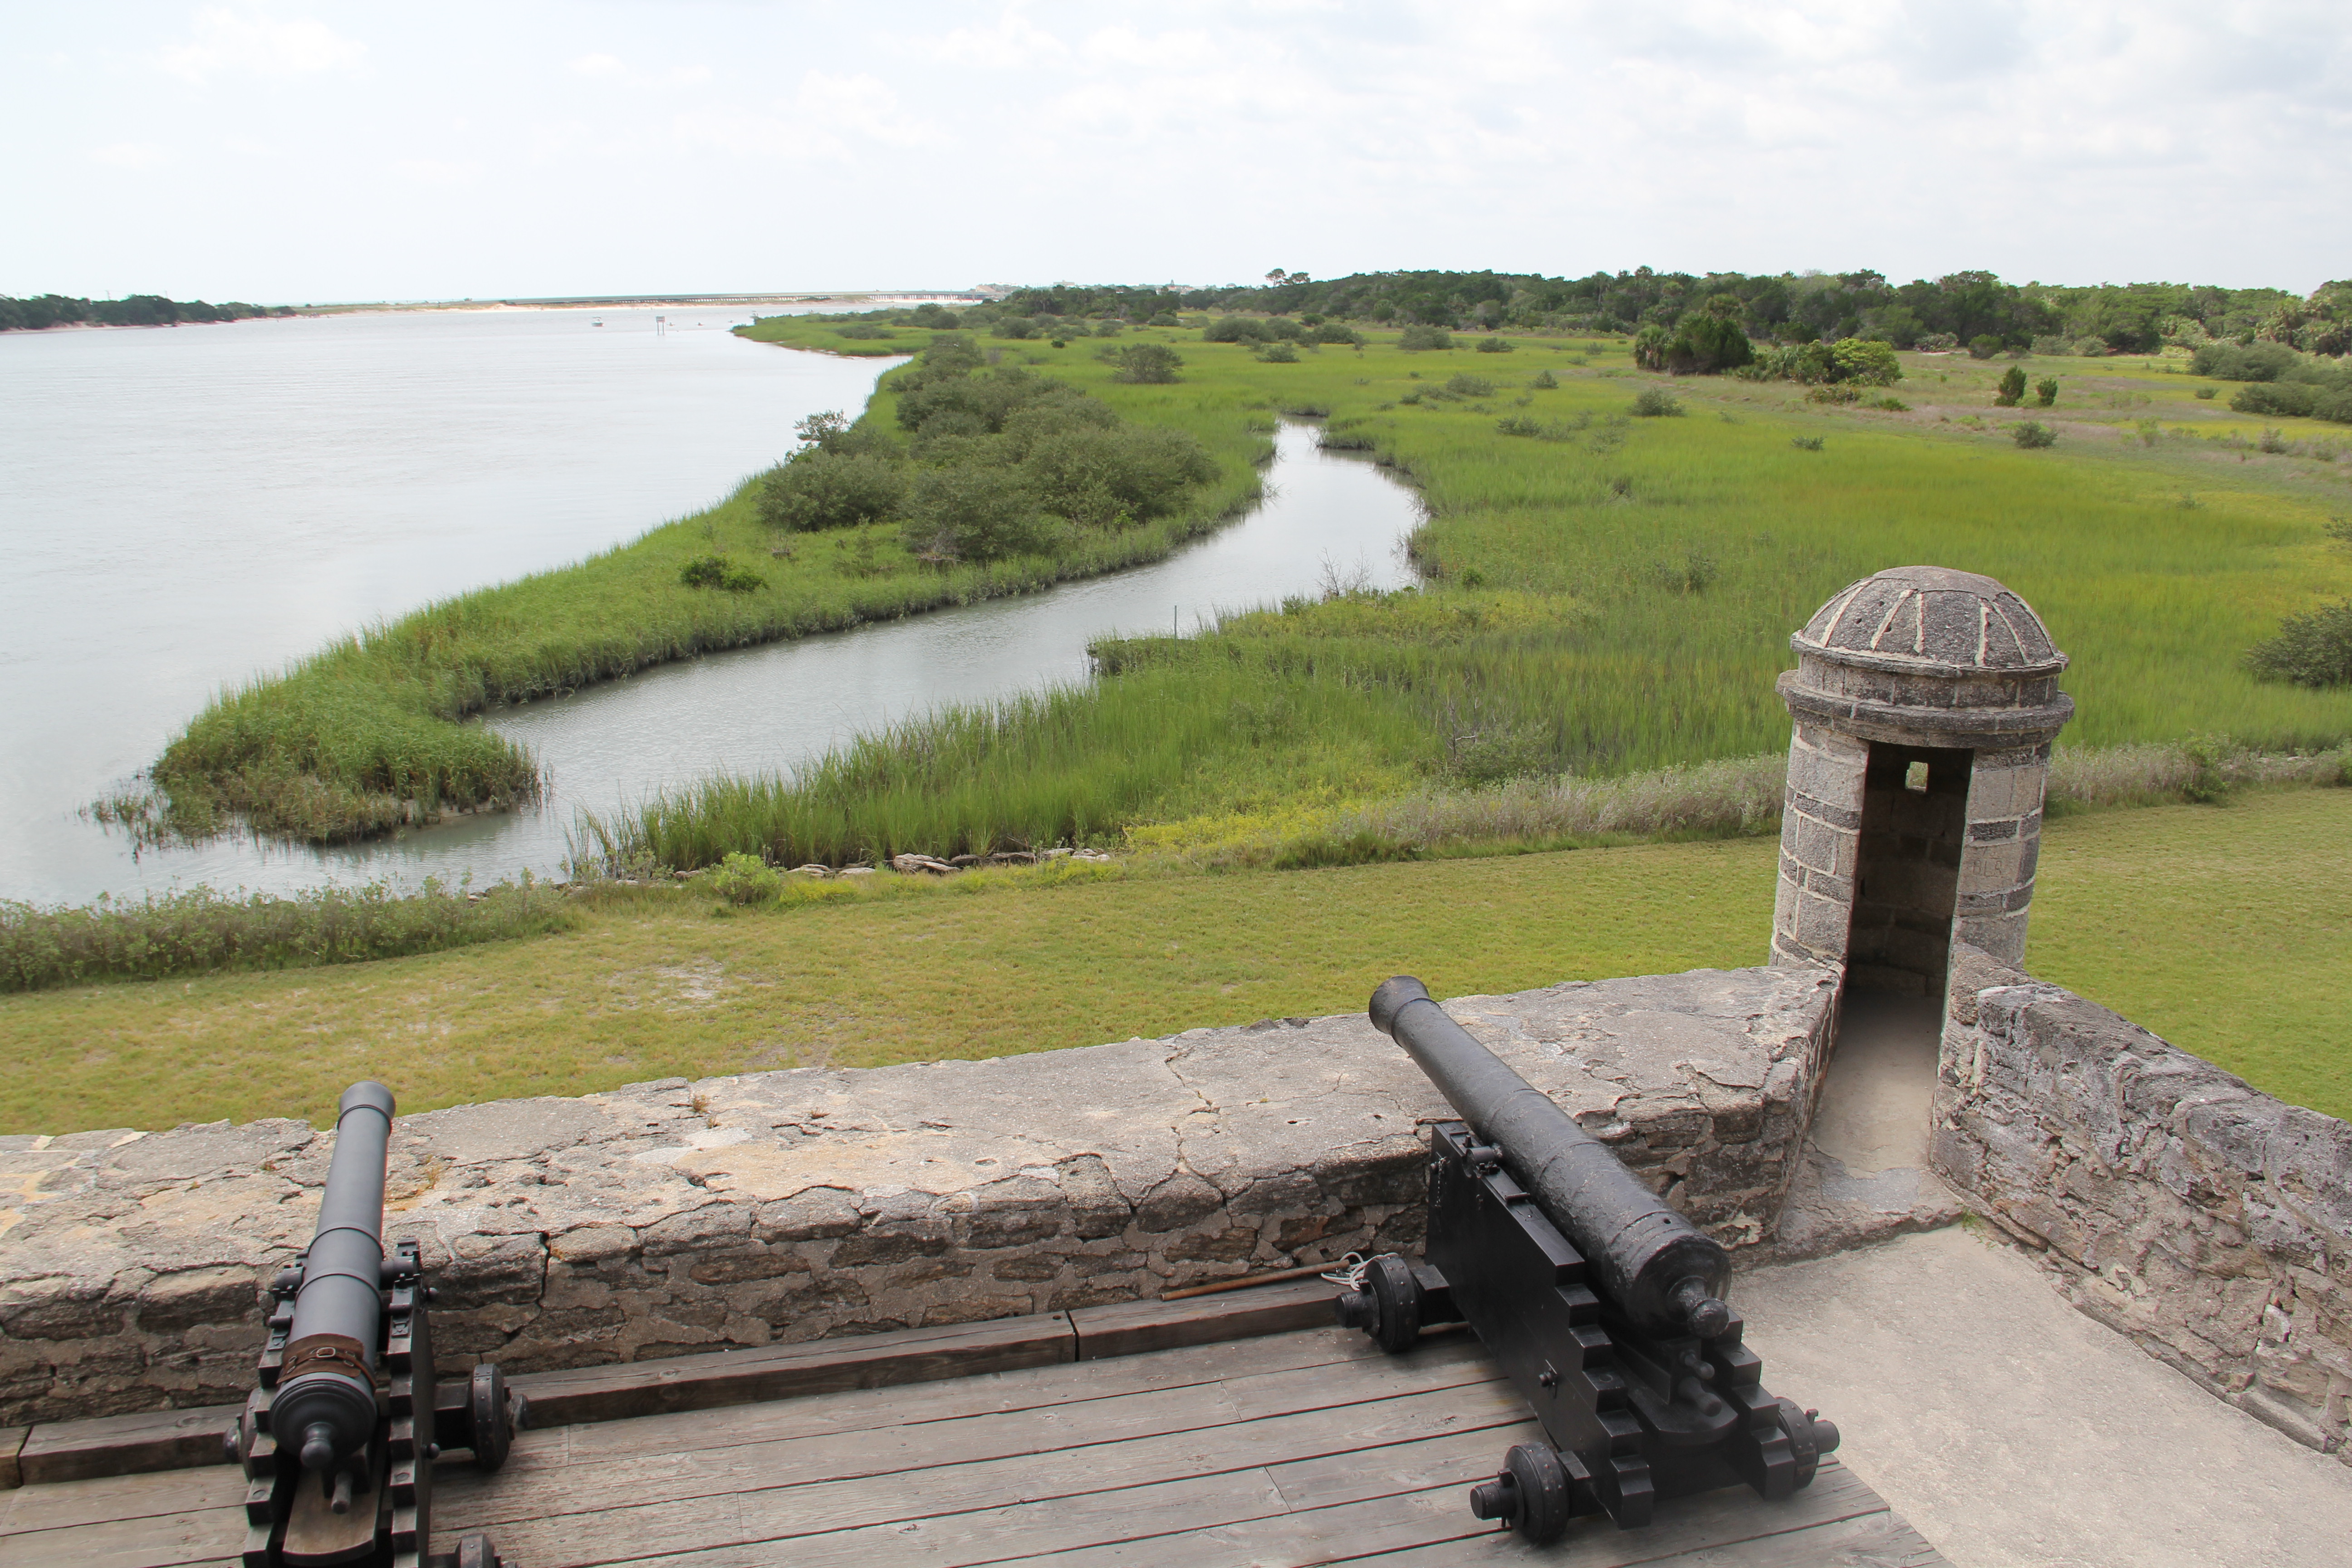 The cannon of Fort Matanzas point toward the river's inlet.